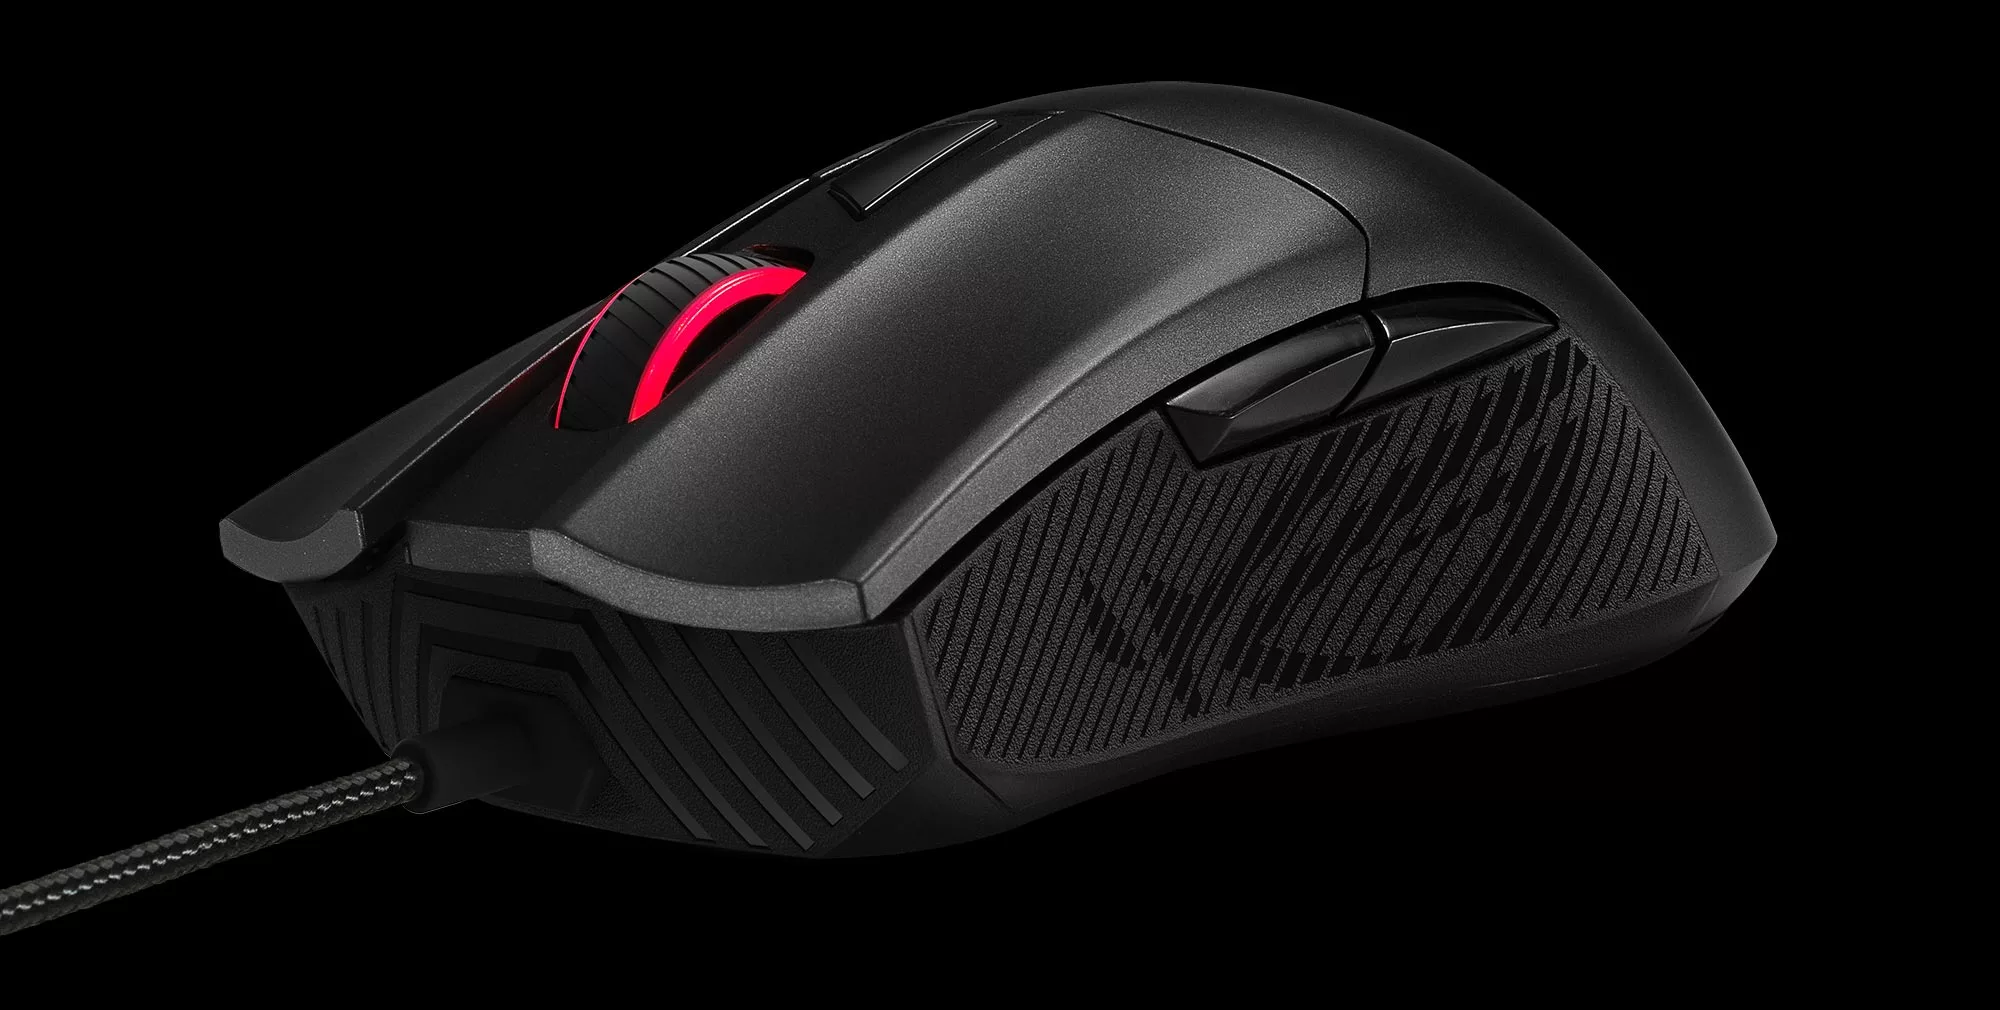 The ROG Gladius II Core mouse brings comfort and precision without breaking  the bank | ROG - Republic of Gamers United Kingdom